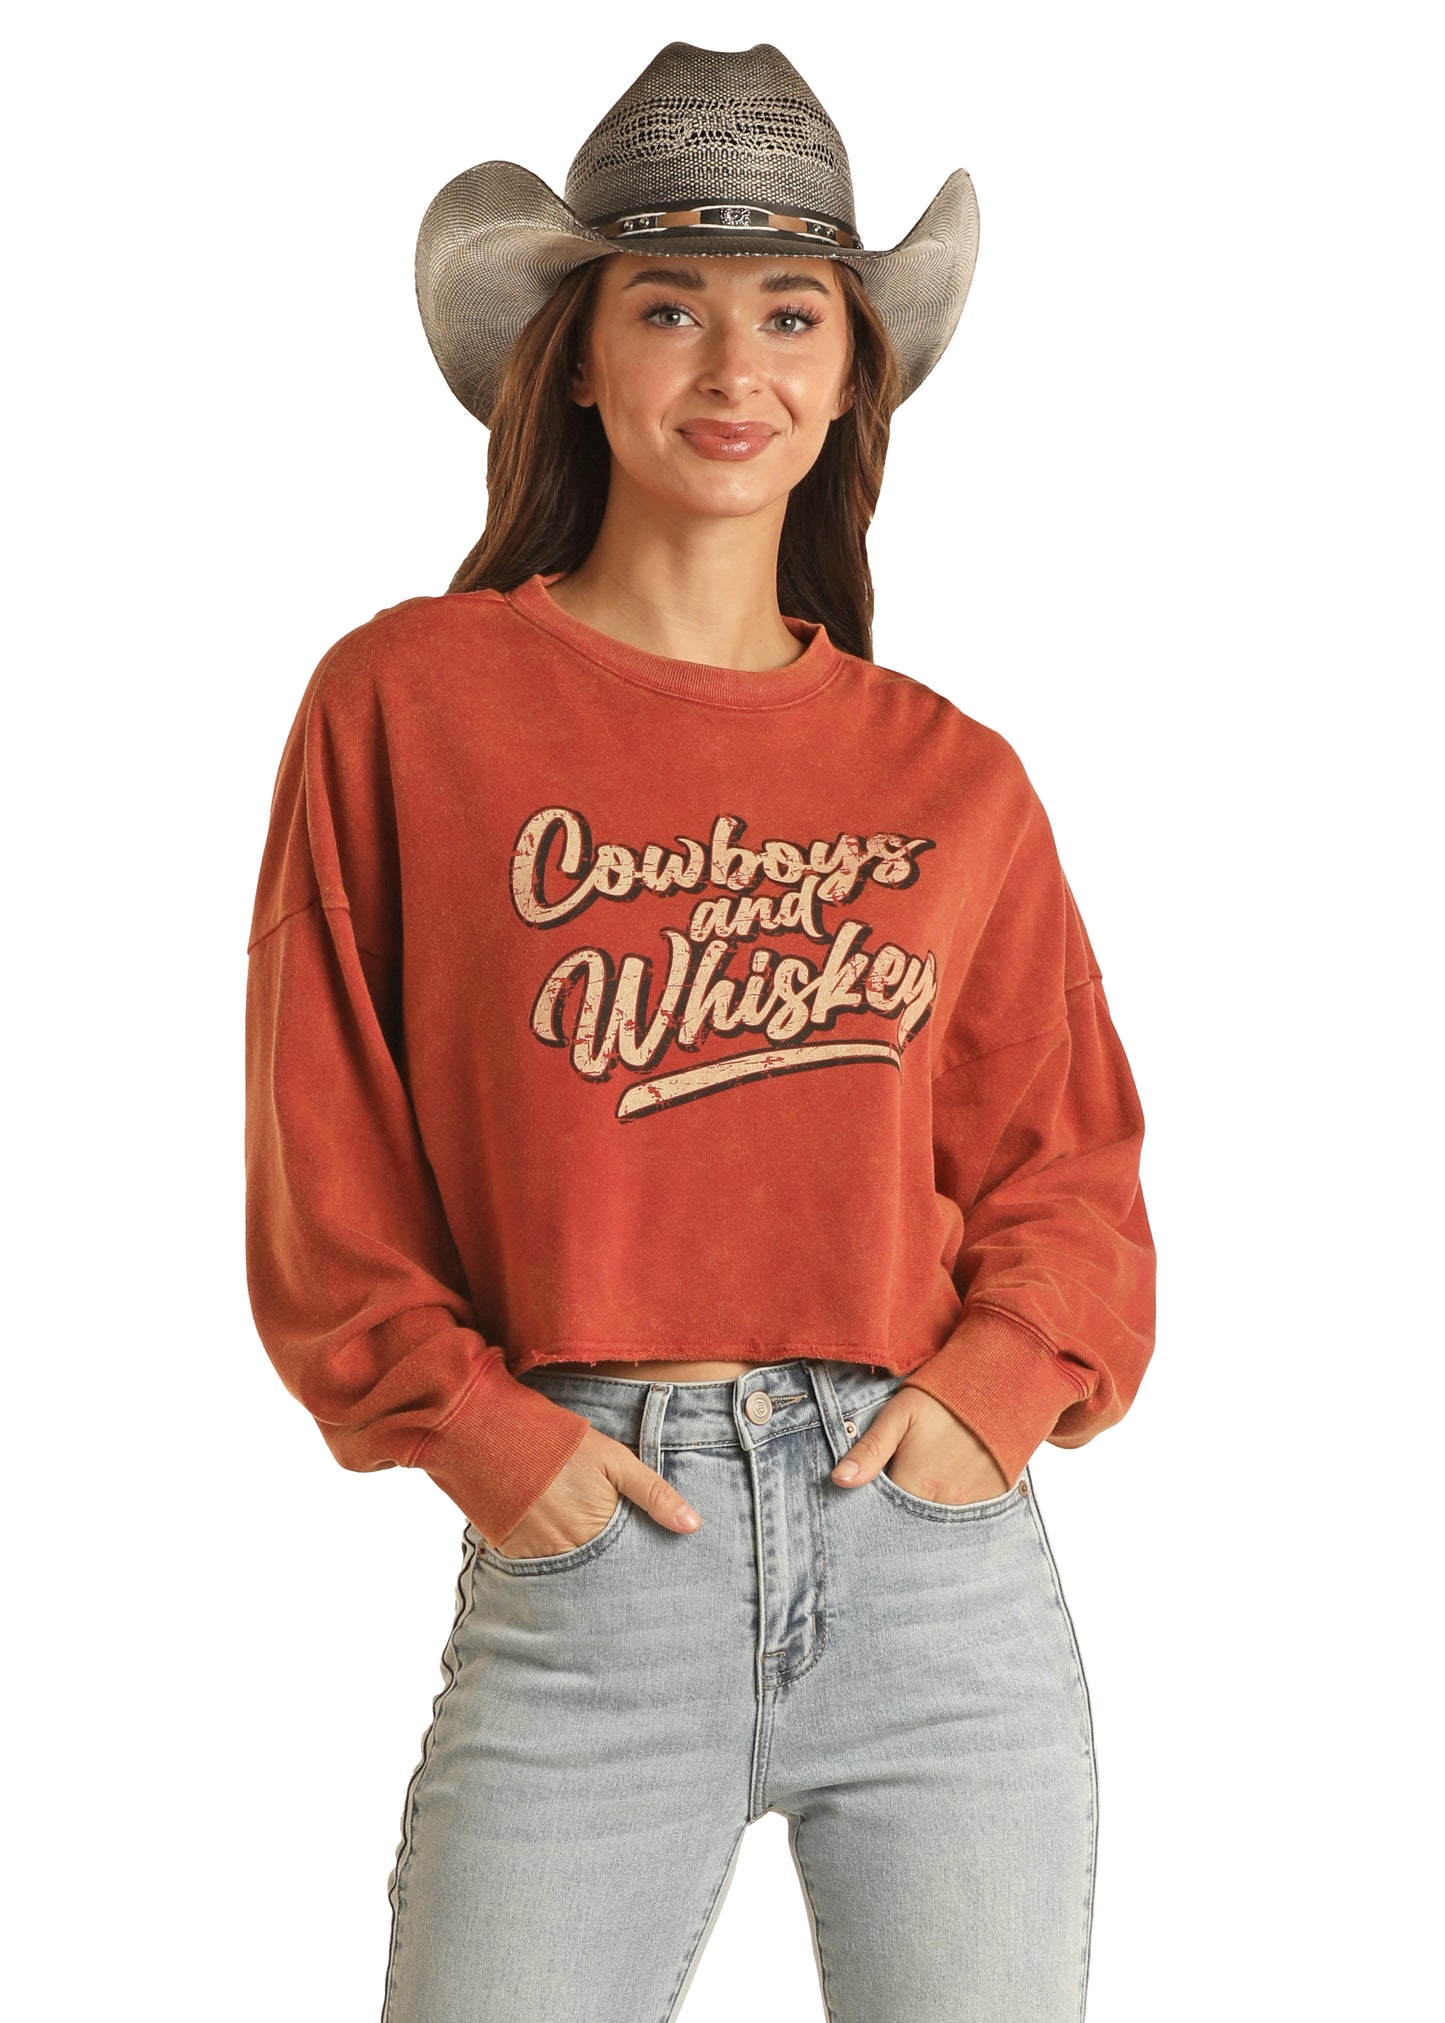 R&R Brick “Cowboys and Whiskey” Cropped